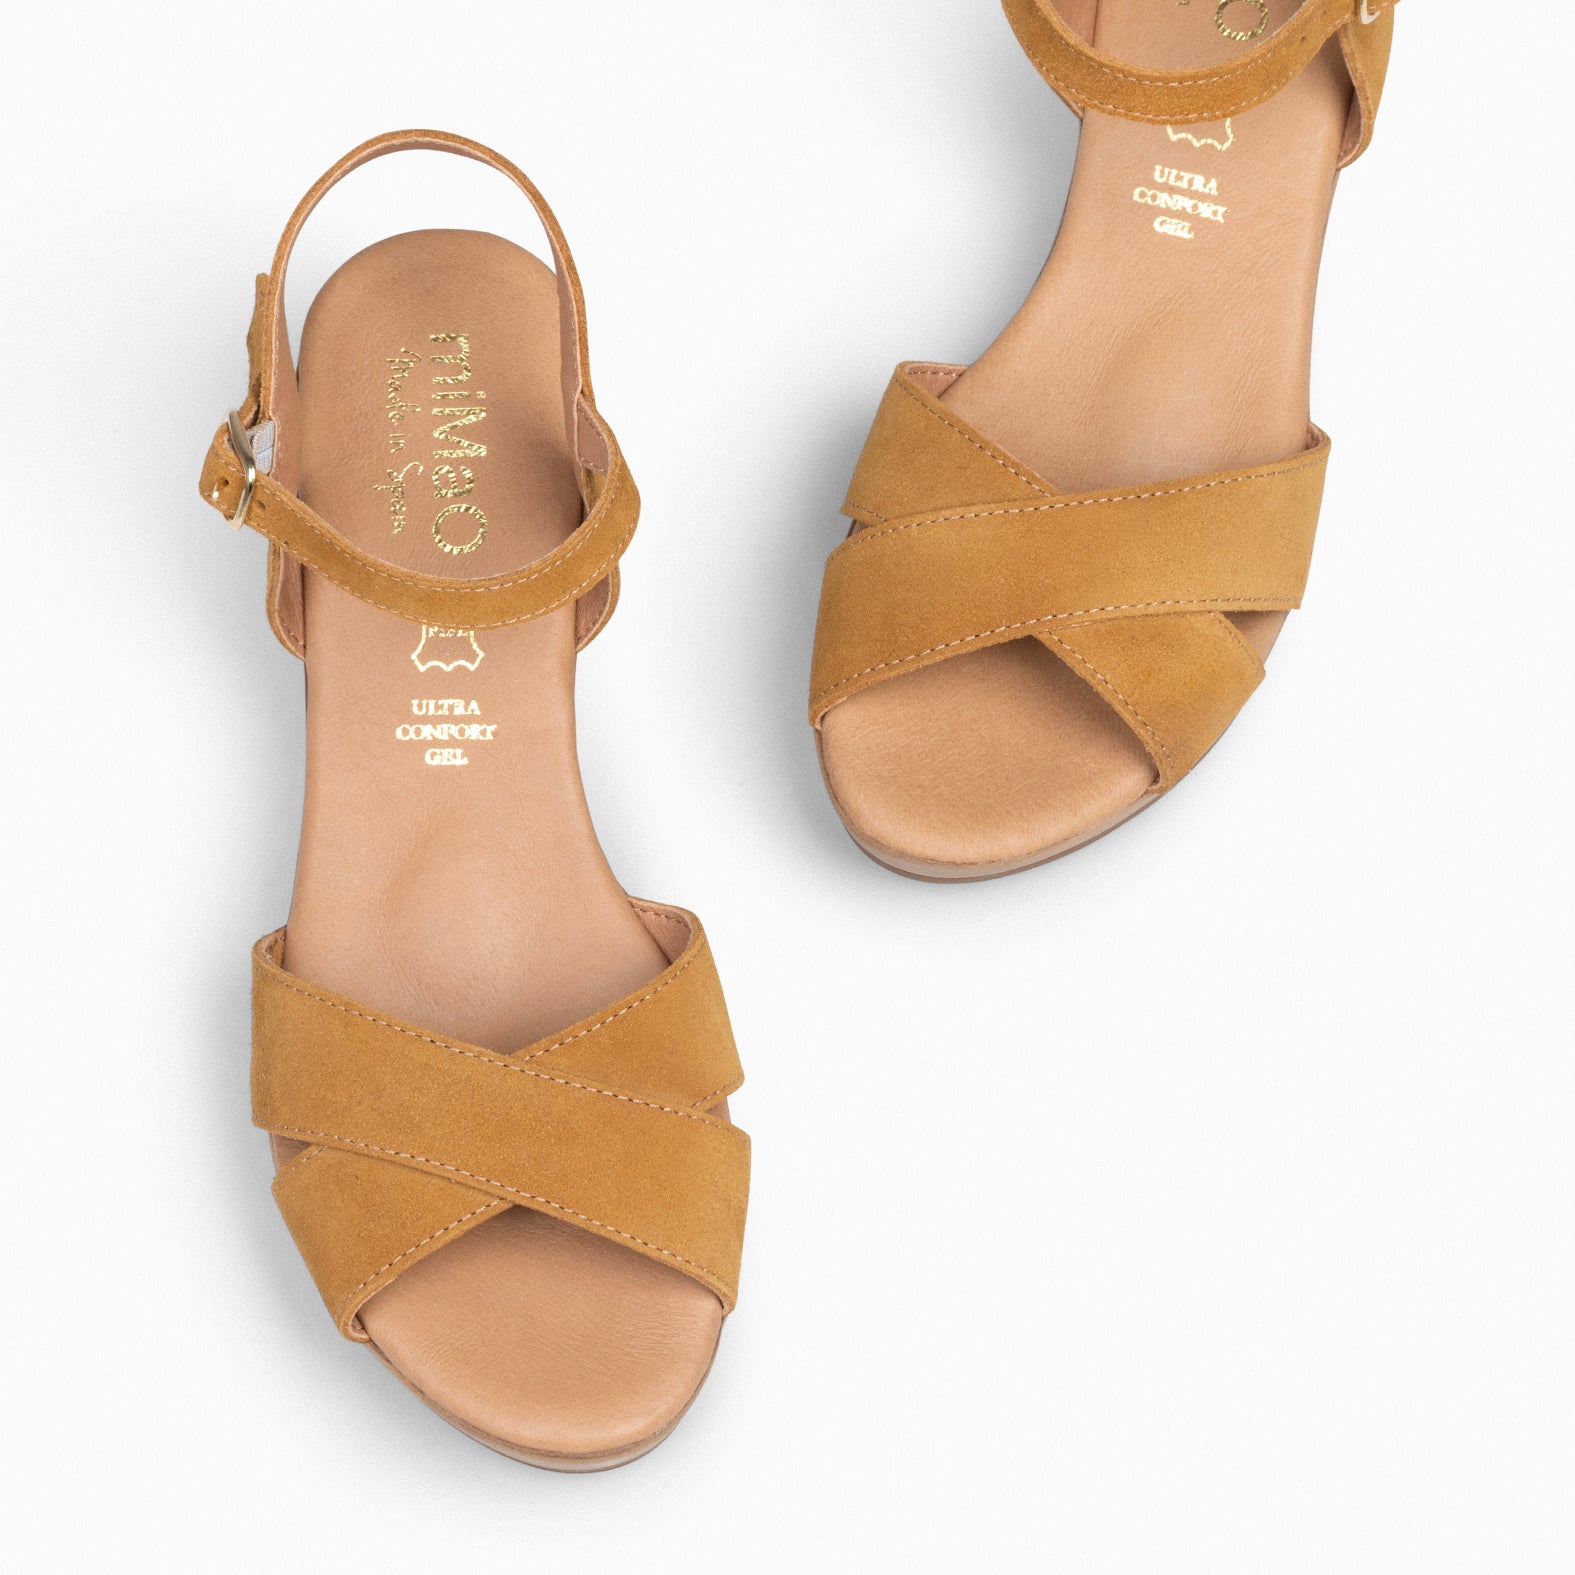 MAR – CAMEL WEDGE SHOES